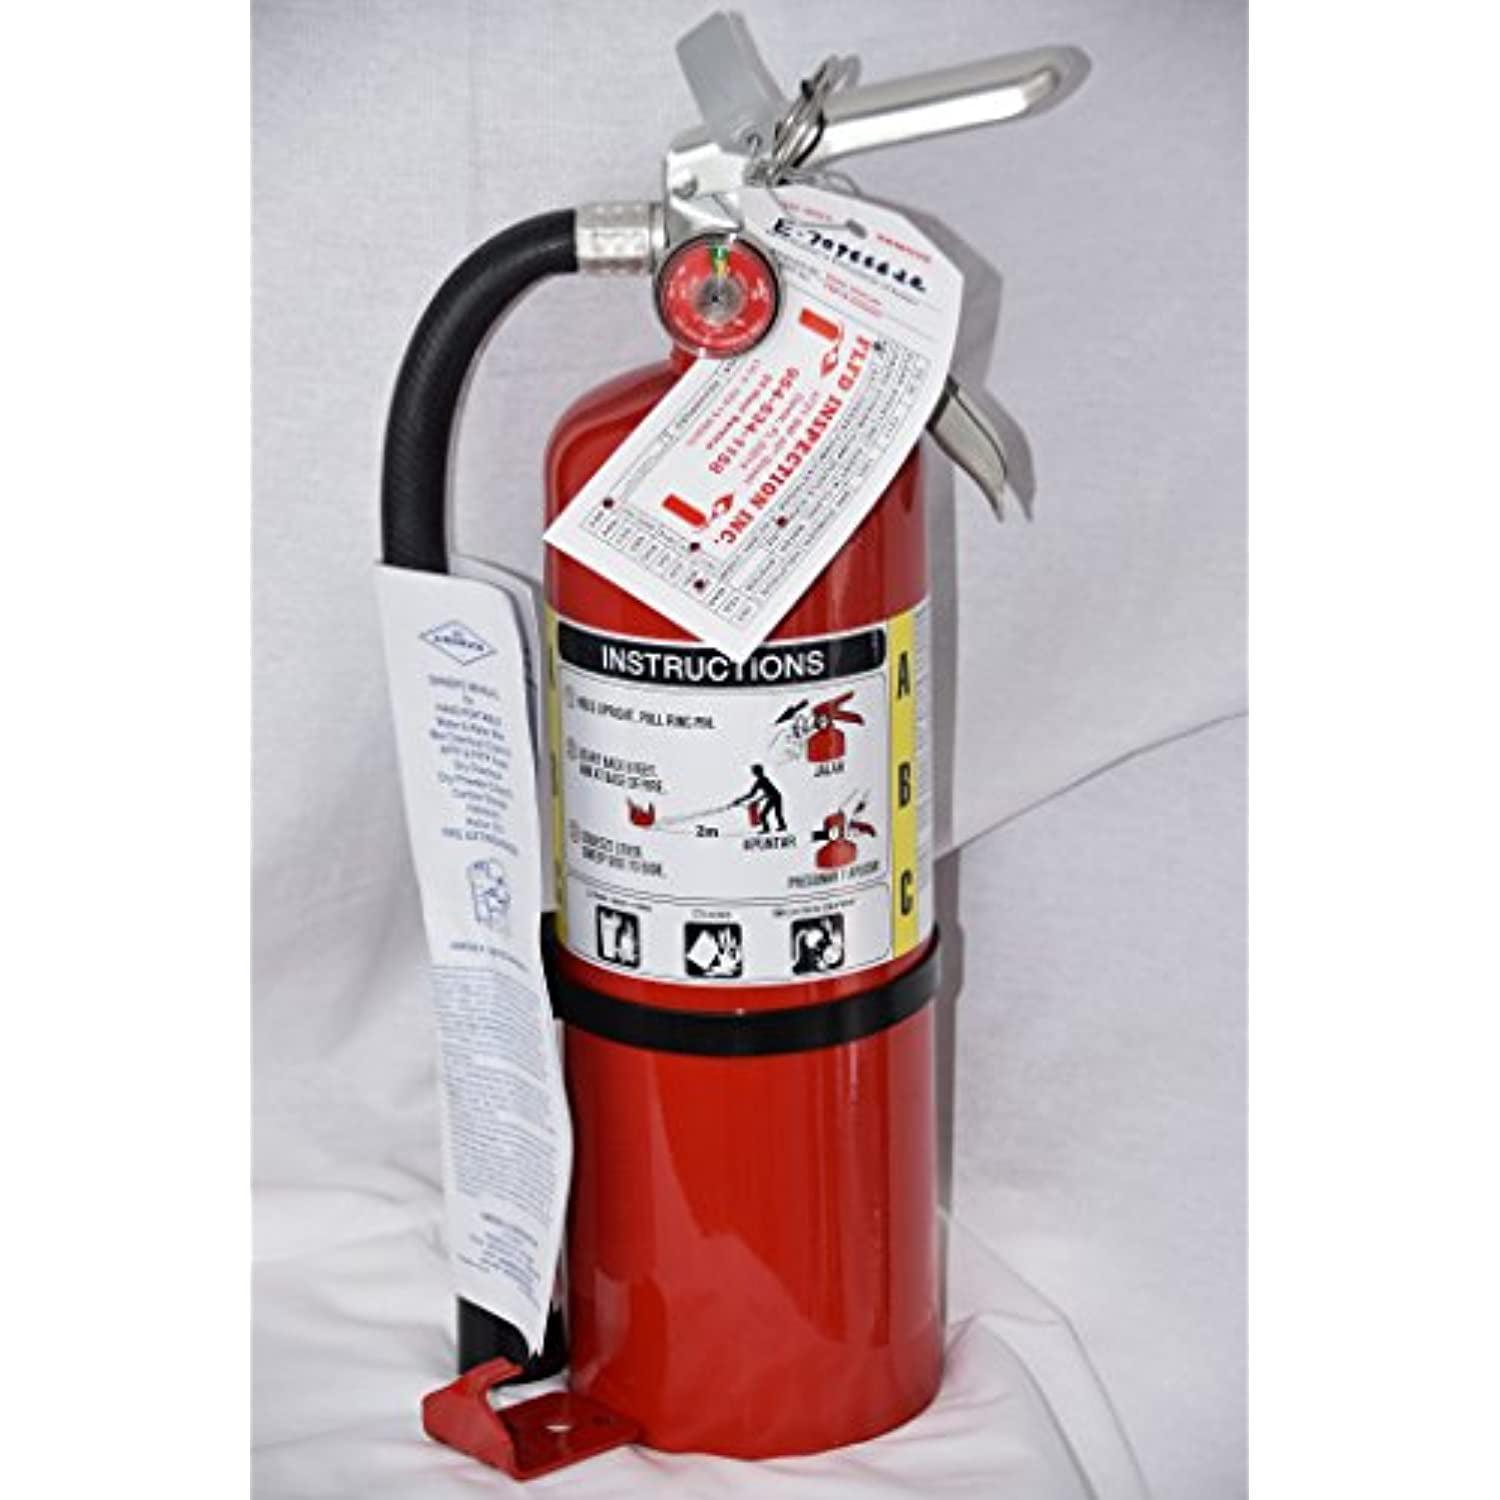 (Lot of 1) 5 Lb. Type ABC Dry Chemical Fire Extinguishers, with 1 - Wall Bracket and 1 - Certification Tag - Ready for Fire Inspections - 3A - 40 BC Rating